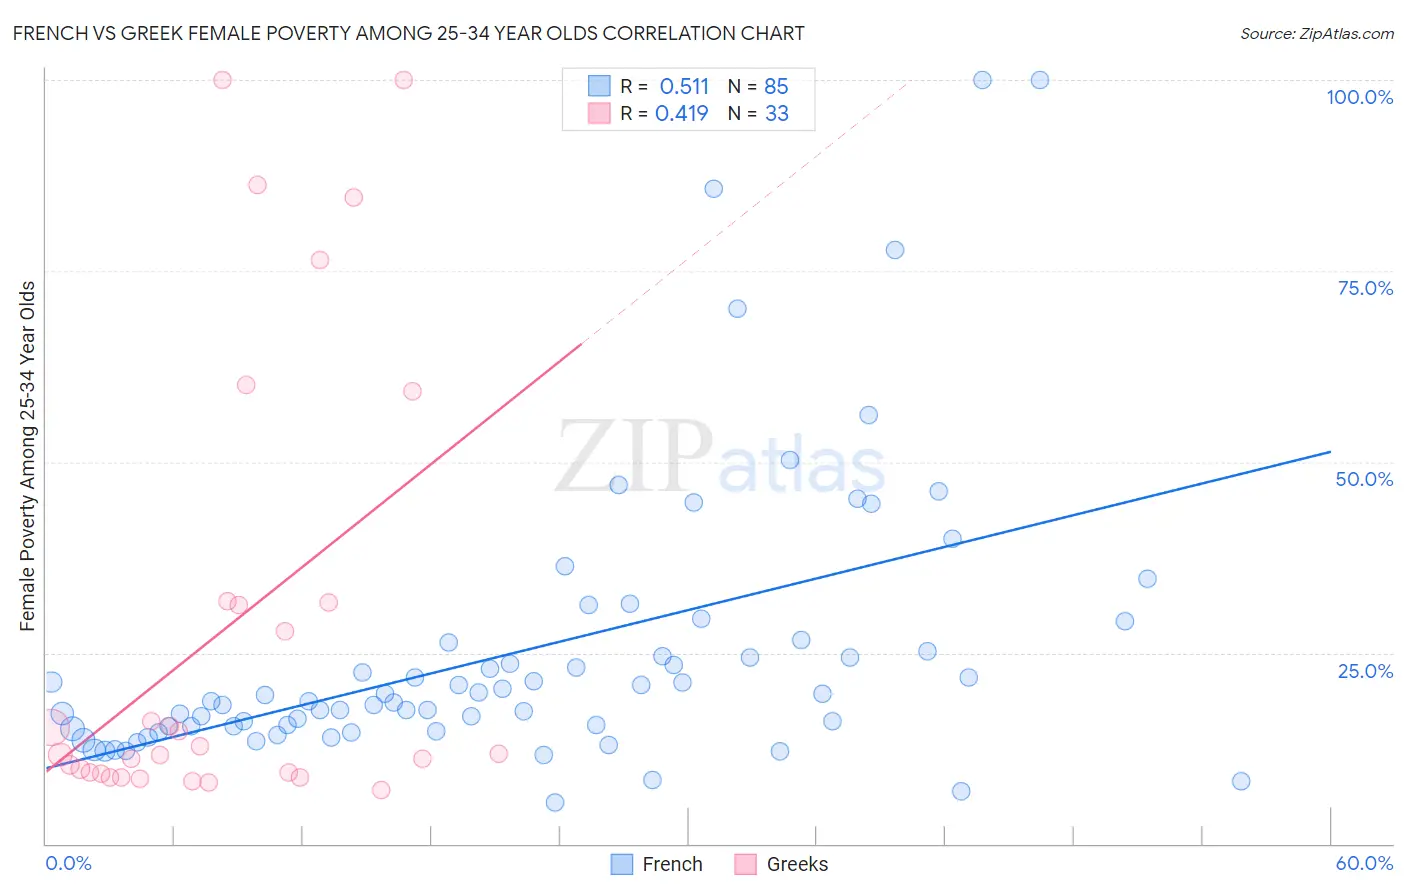 French vs Greek Female Poverty Among 25-34 Year Olds